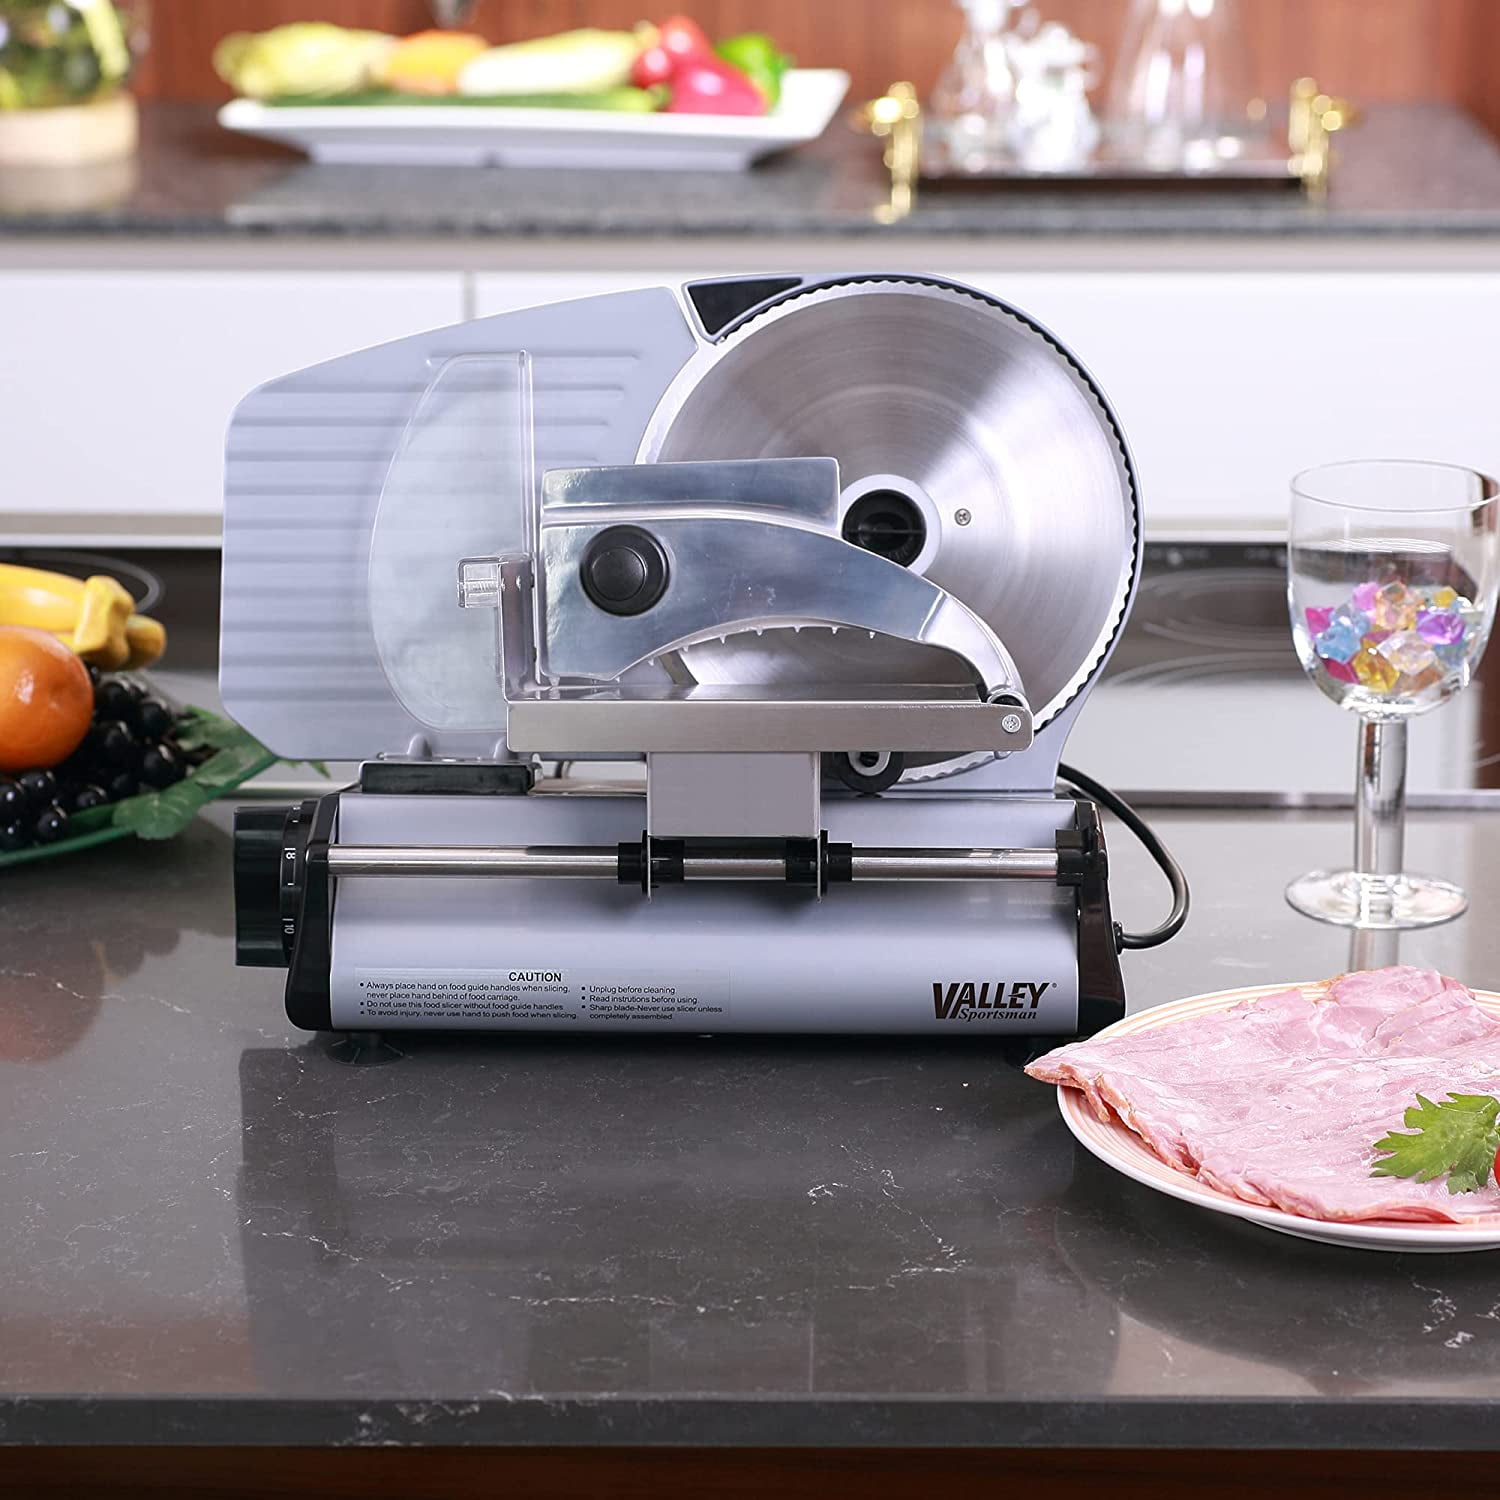 Craftworx Stainless Steel Food Slicer with Quick Release - 8.7 - North 40 Outfitters